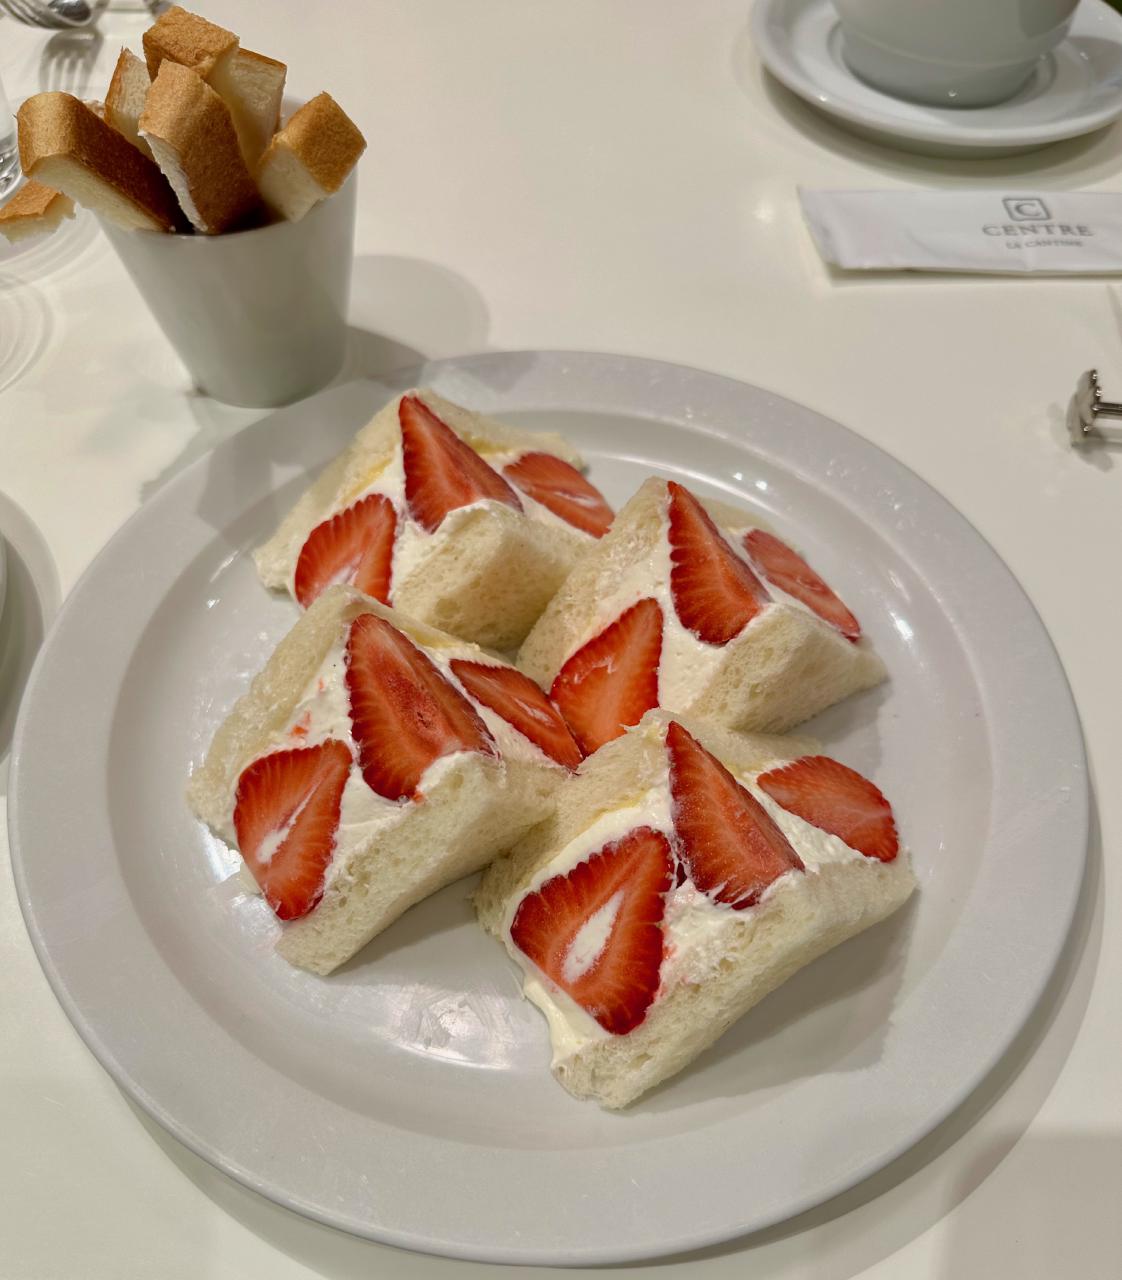 A strawberry sandwich at Centre the Bakery